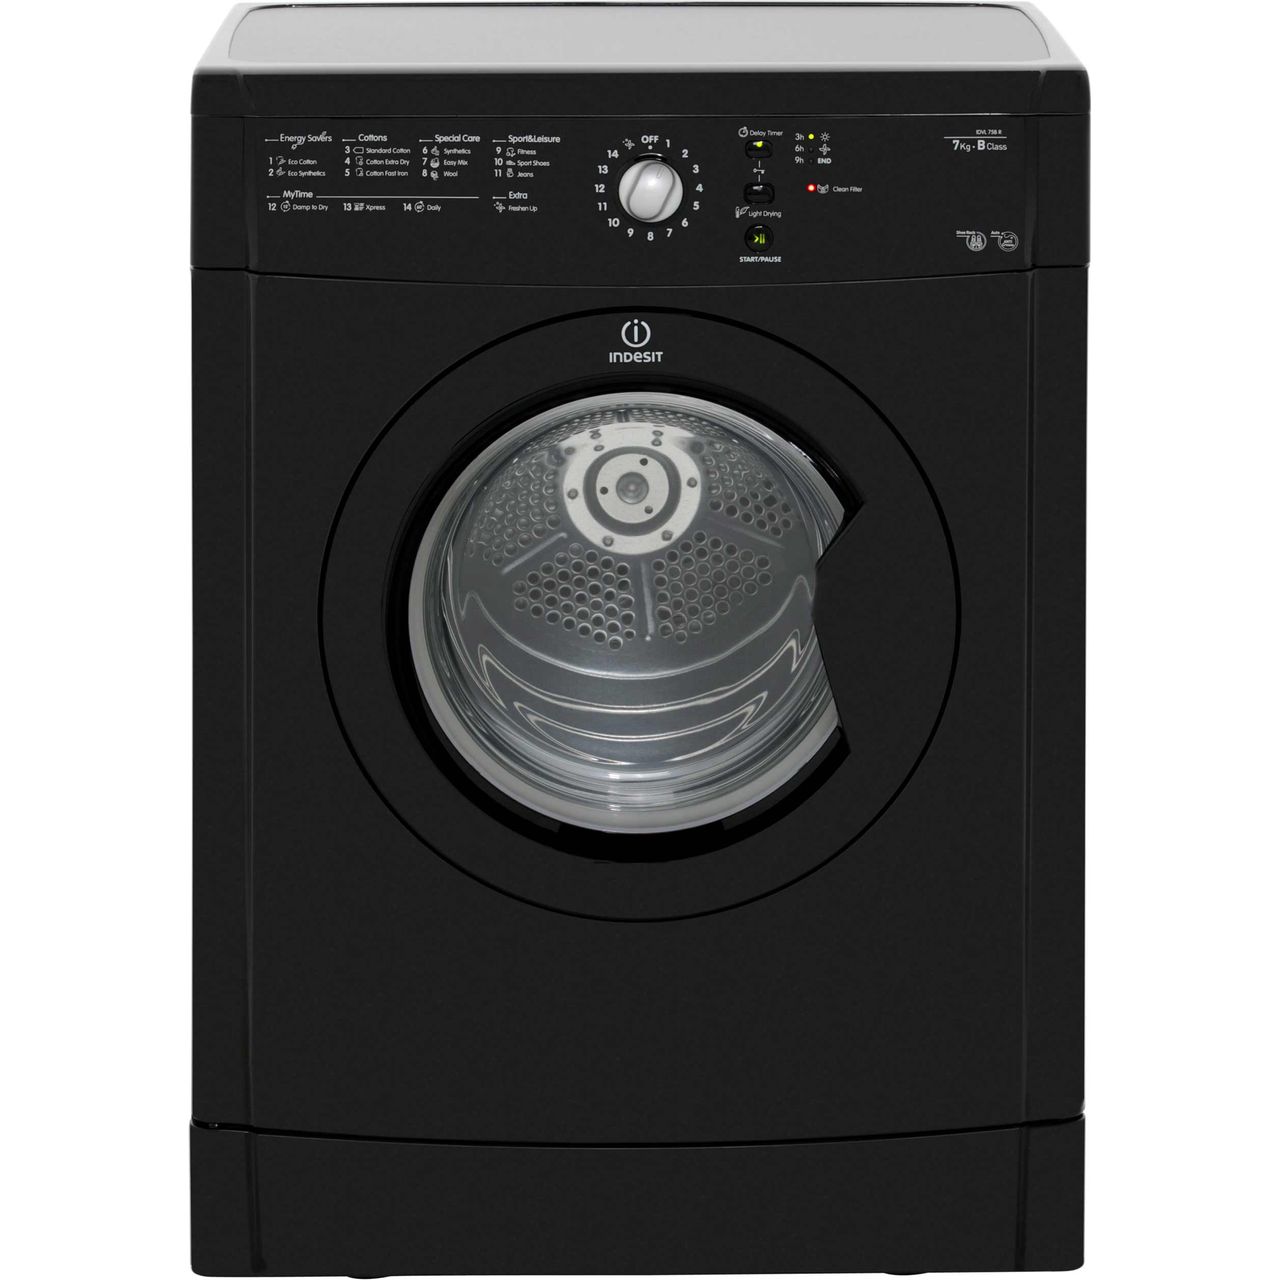 Indesit Eco Time IDVL75BRK 7Kg Vented Tumble Dryer Review